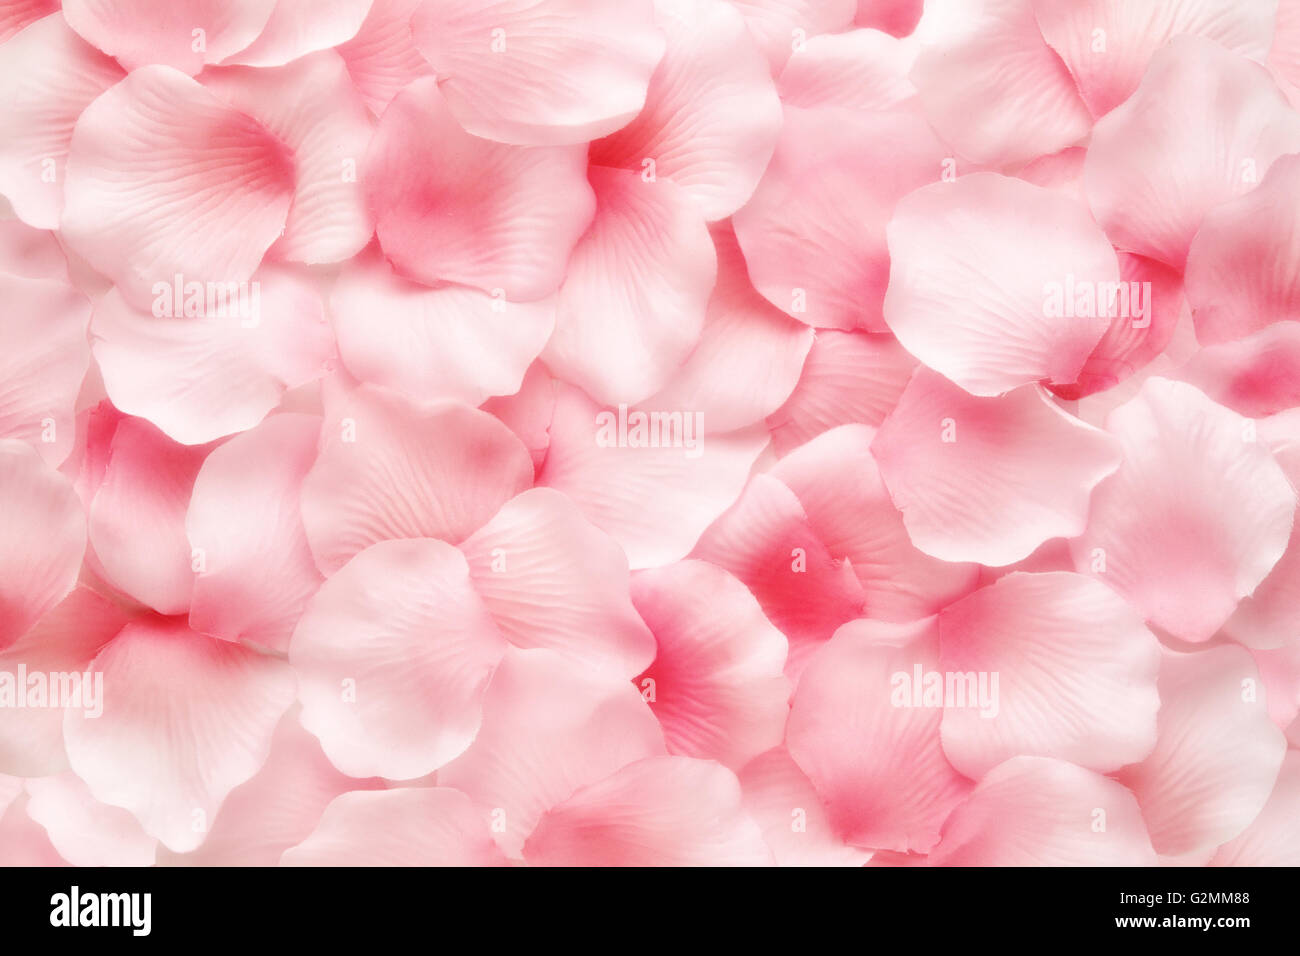 Beautiful delicate pink rose petal background texture Stock Photo